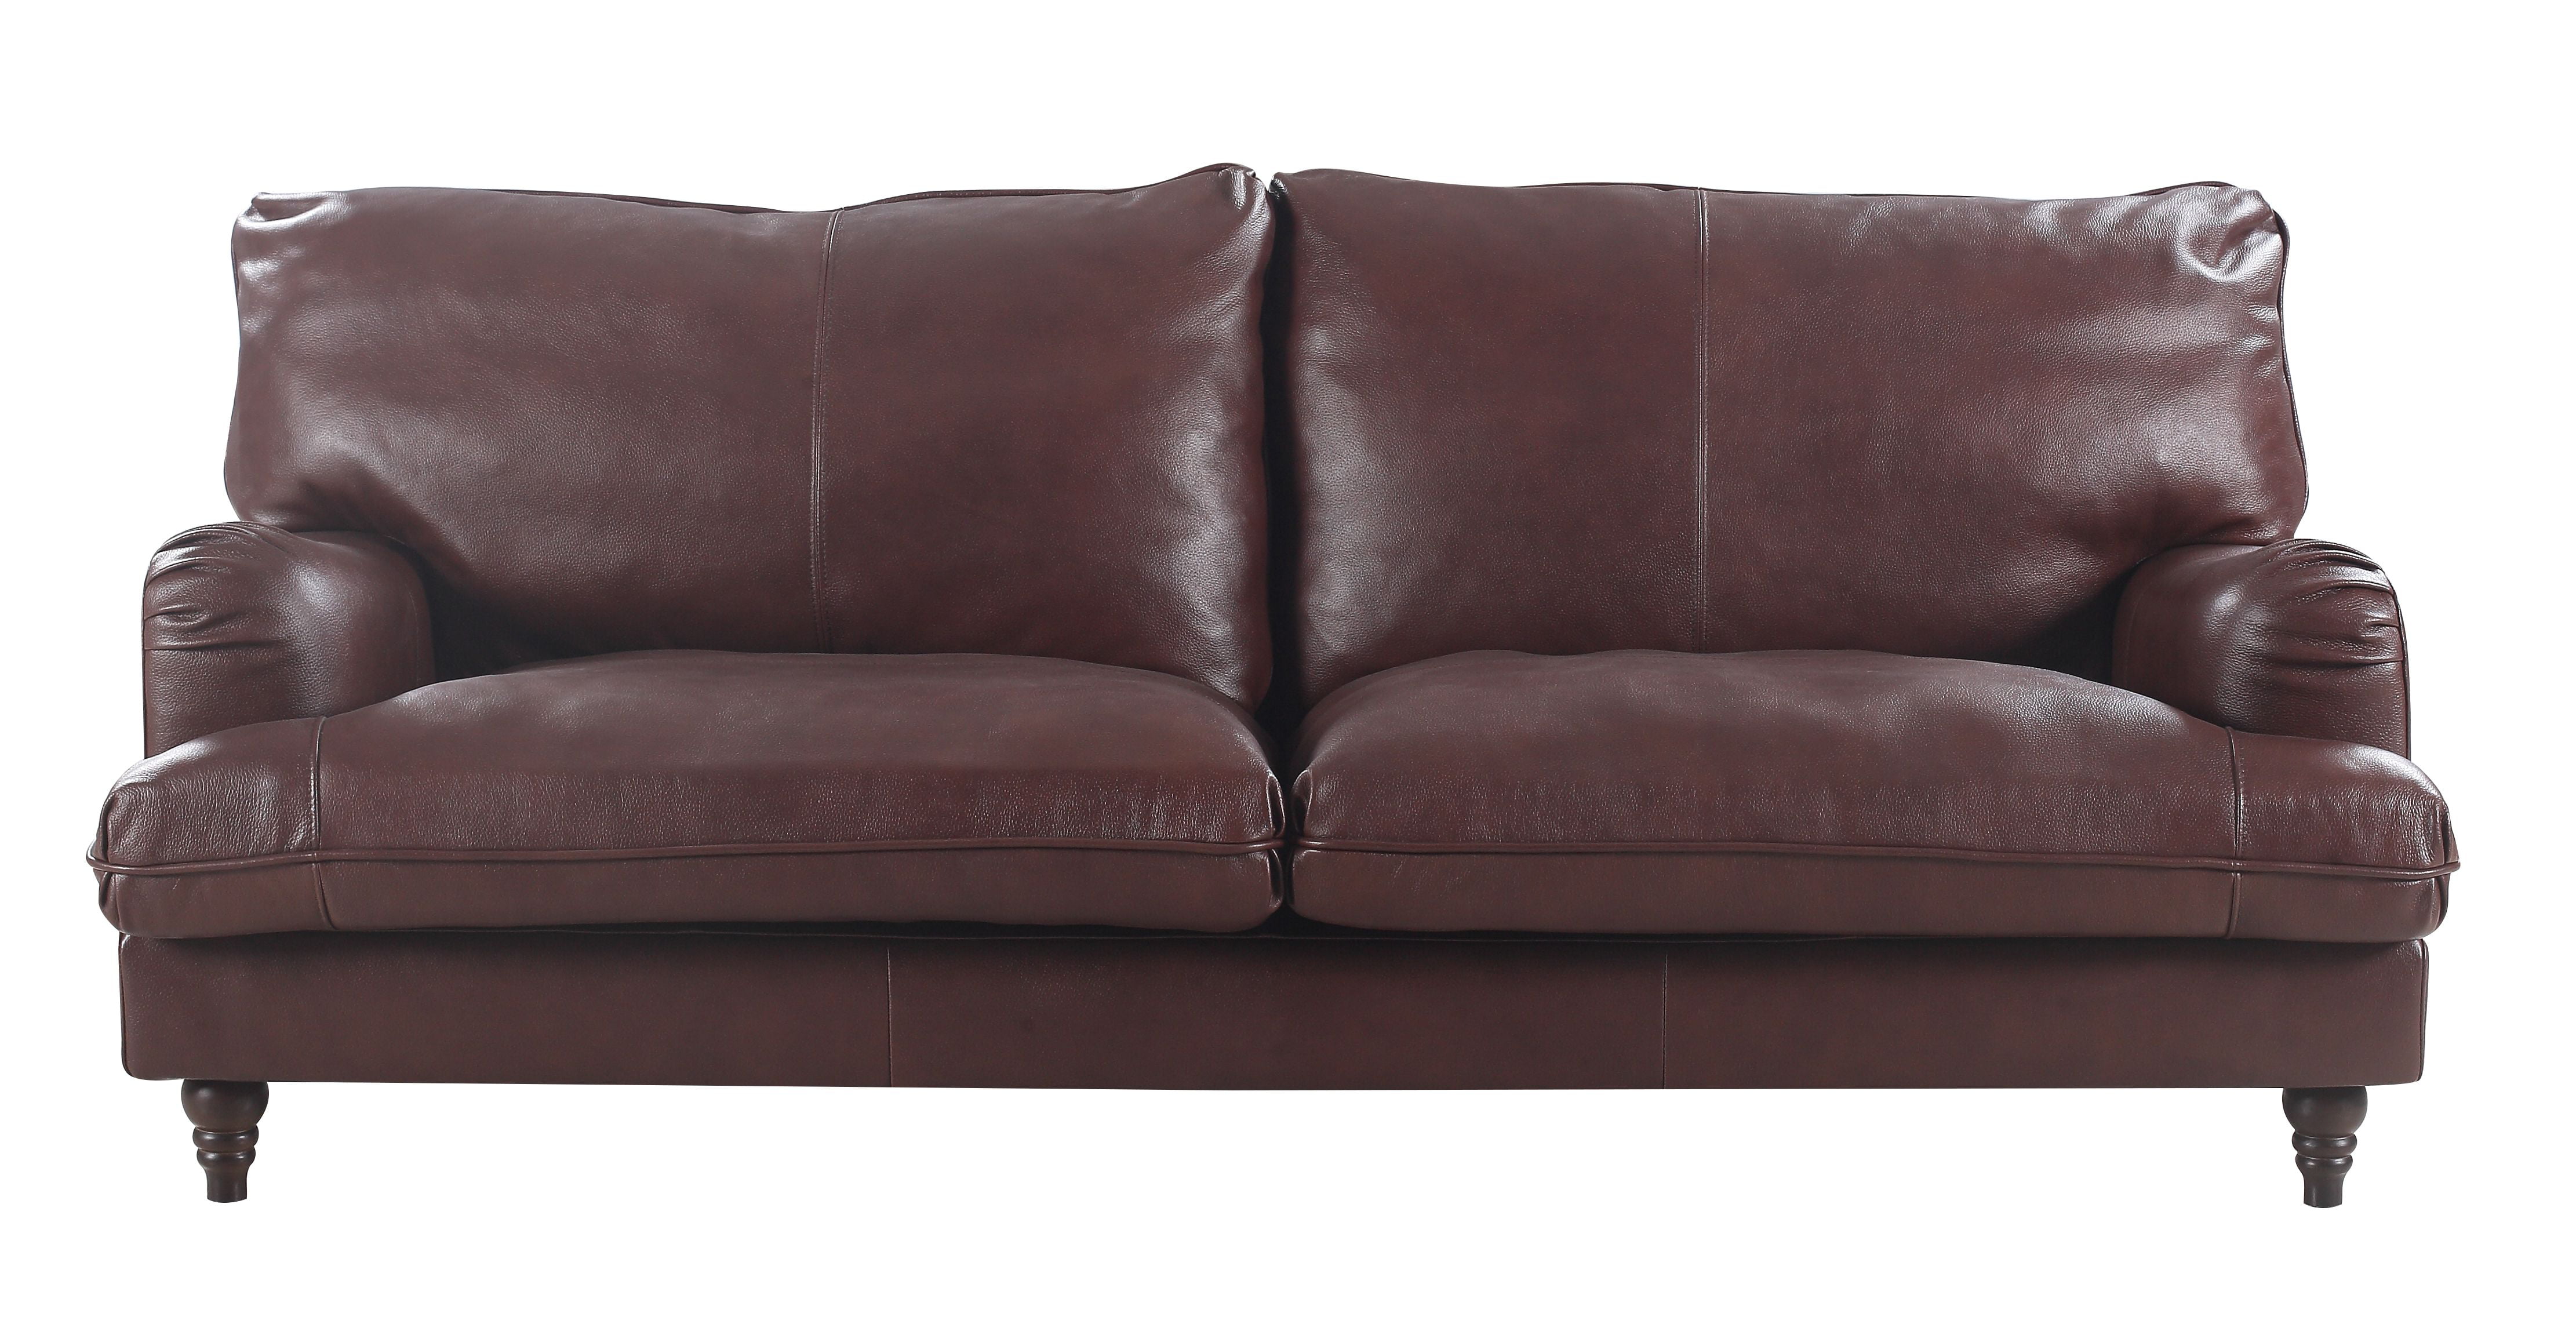 sterling cognac brown italian leather sofa and loveseat